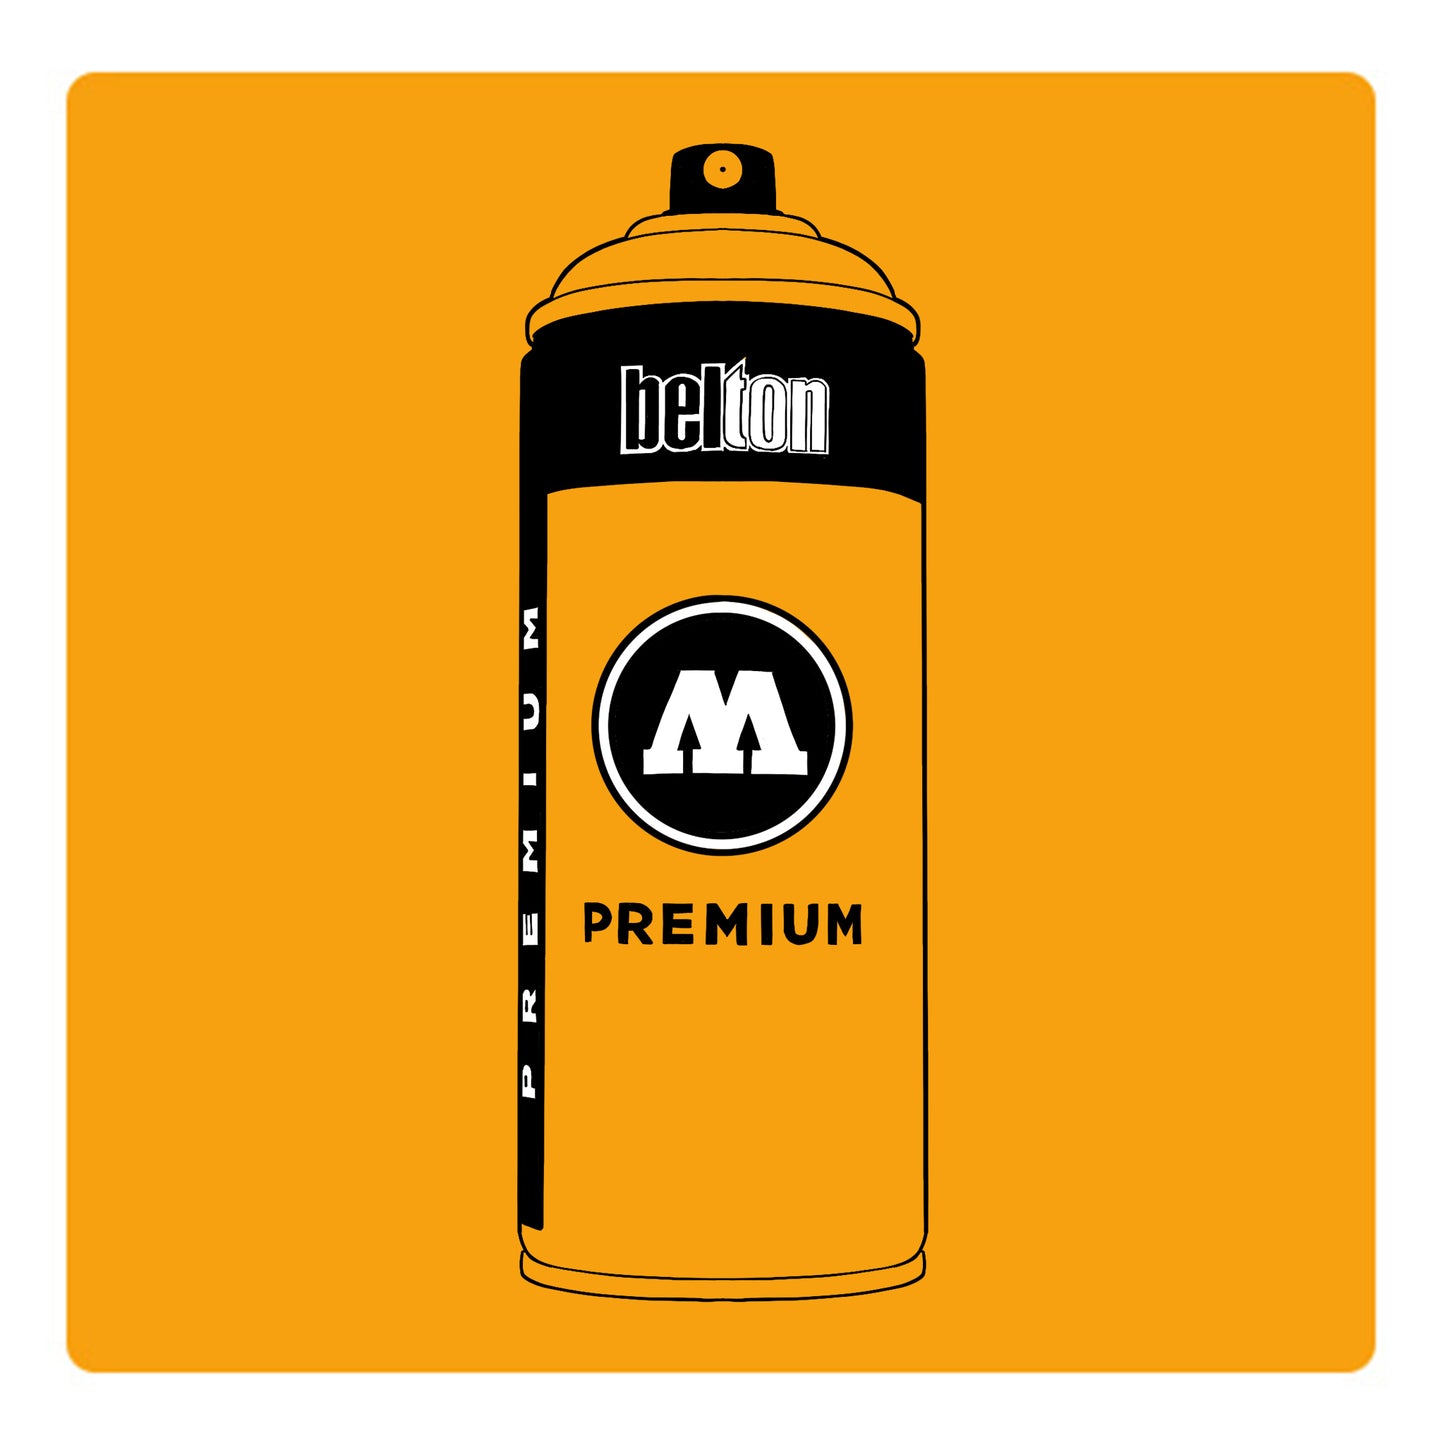 A black outline drawing of a mango yellow spray paint can with the words "belton","premium" and the letter"M" written on the face in black and white font. The background is a color swatch of the same mango yellow with a white border.